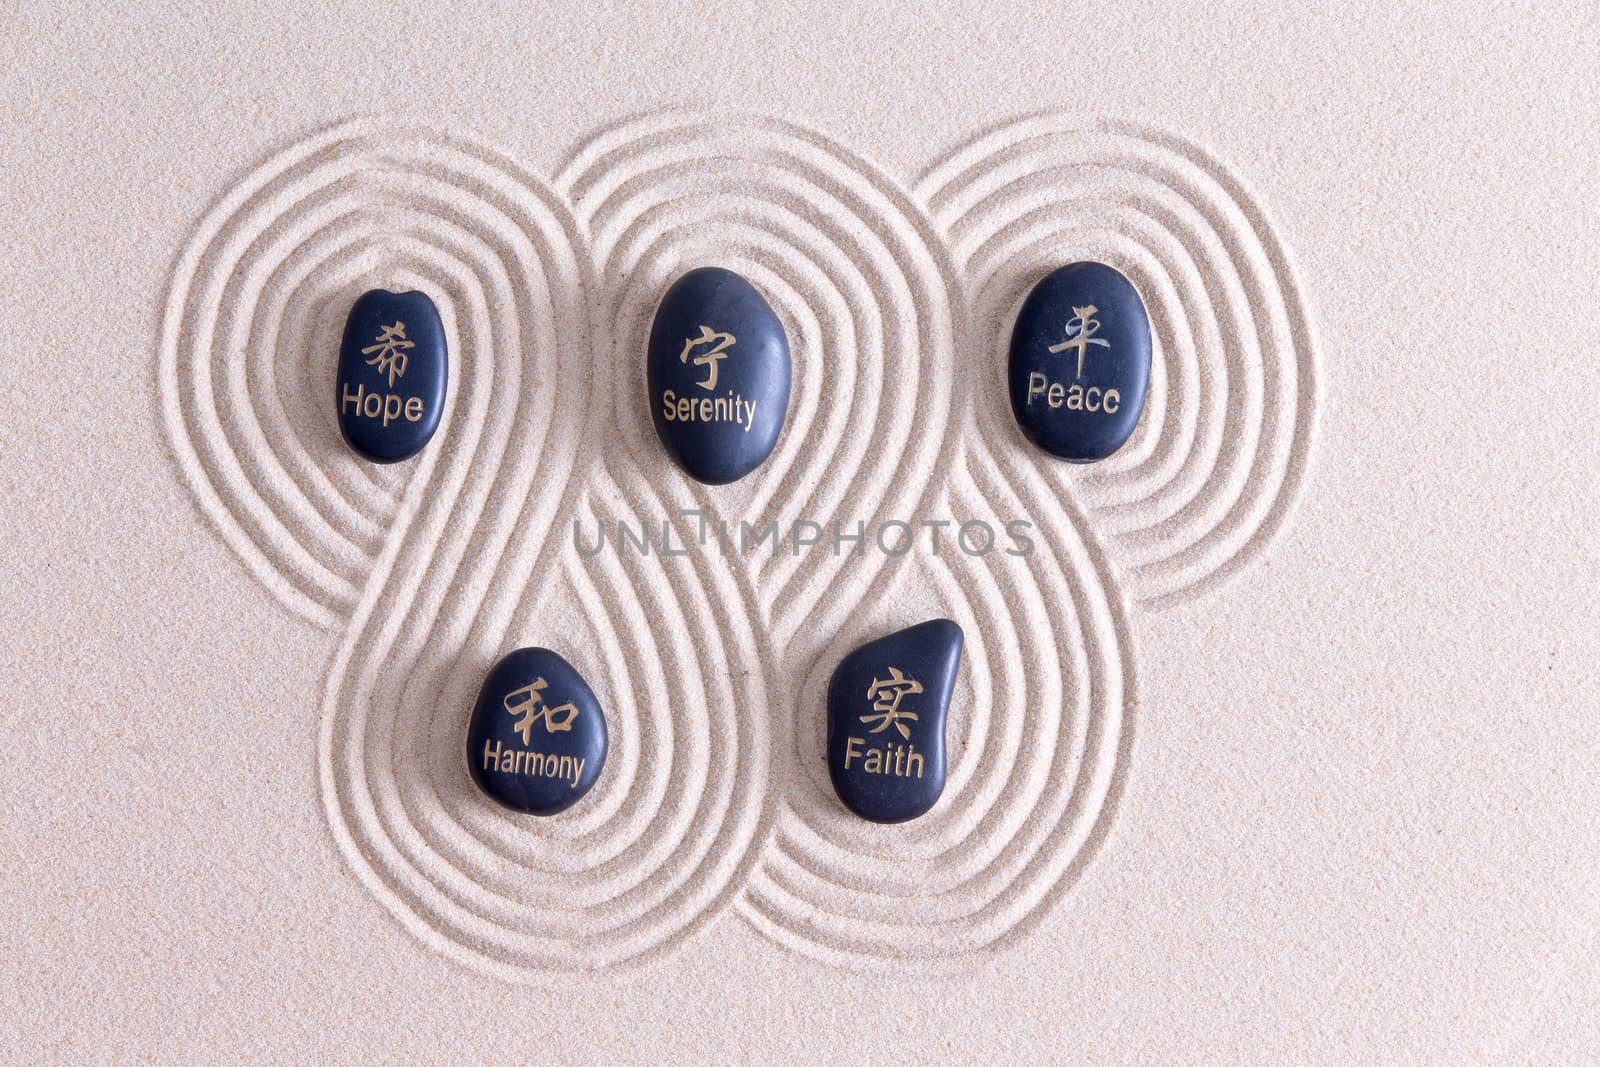 Zen art with stones on golden sand surrounded by a swirling infinite pattern of raked lines symbolizing peace, harmony, faith, hope and serenity, overhead view with copyspace